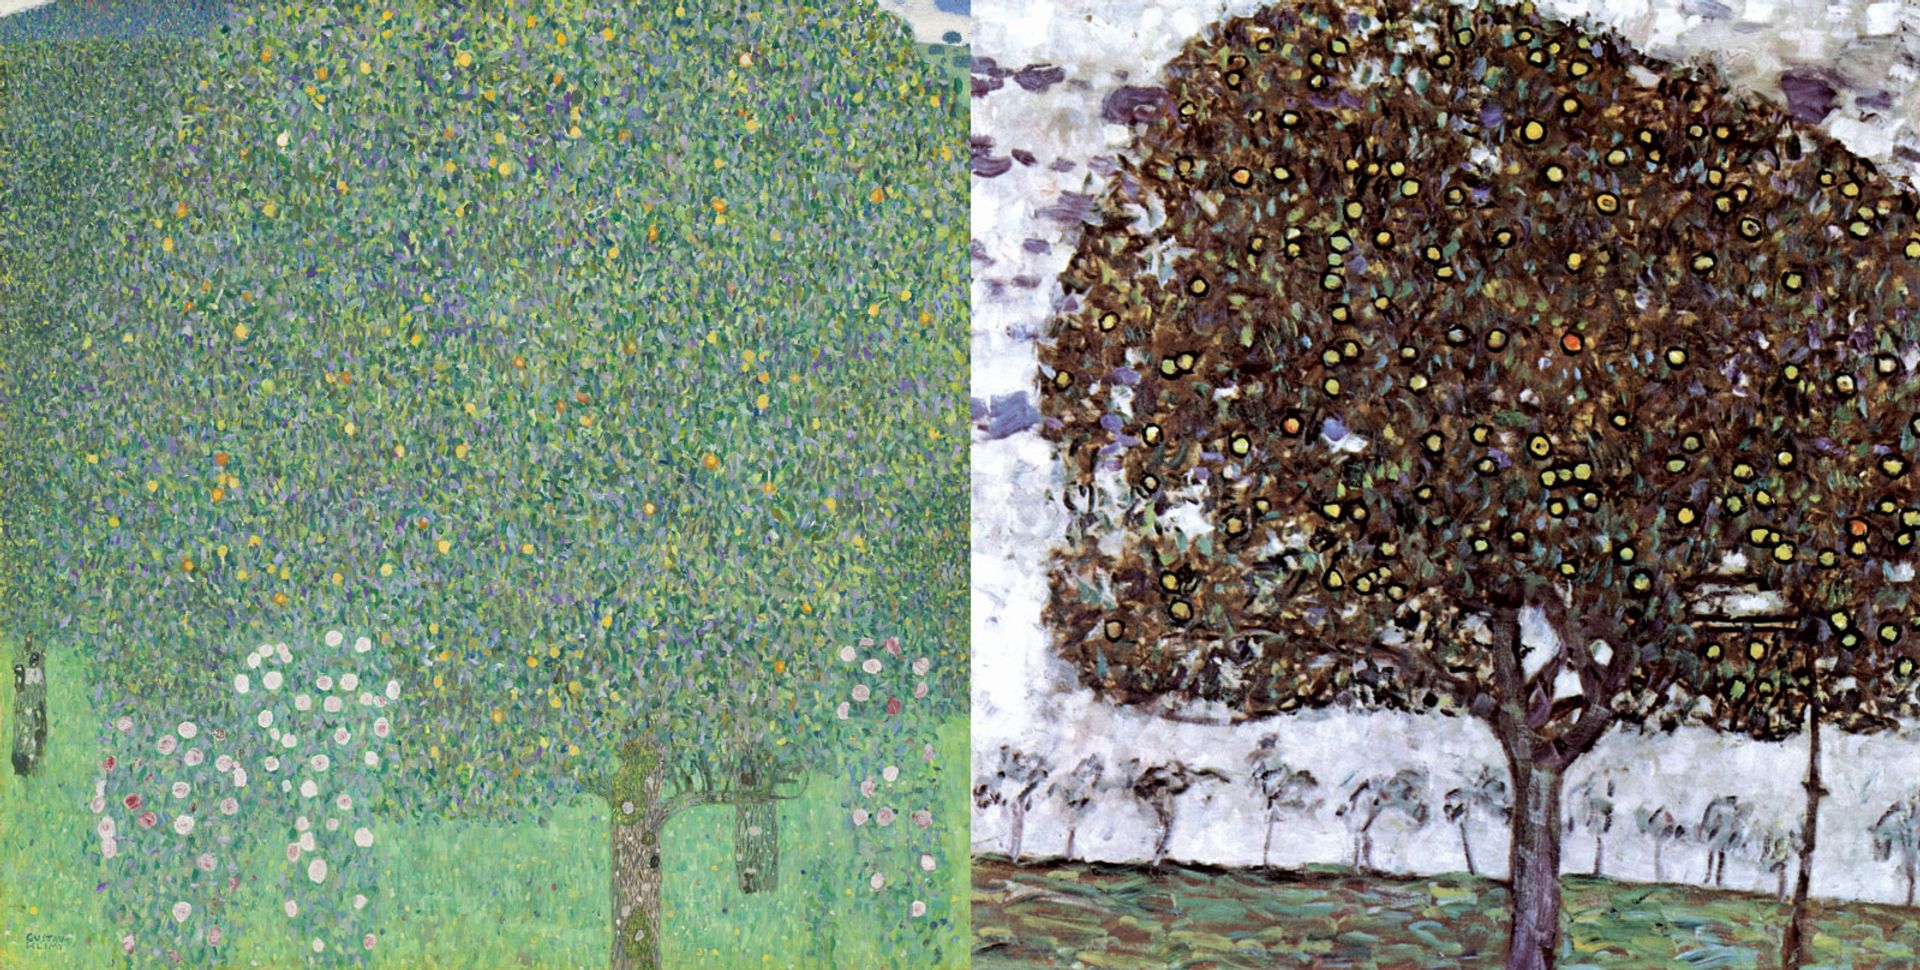 Klimt’s Roses under Trees (1905, left), in the Musée d’Orsay, was apparently confused with Apple Tree II (1916, right) Roses Under Trees: Courtesy of the Musée d’Orsay